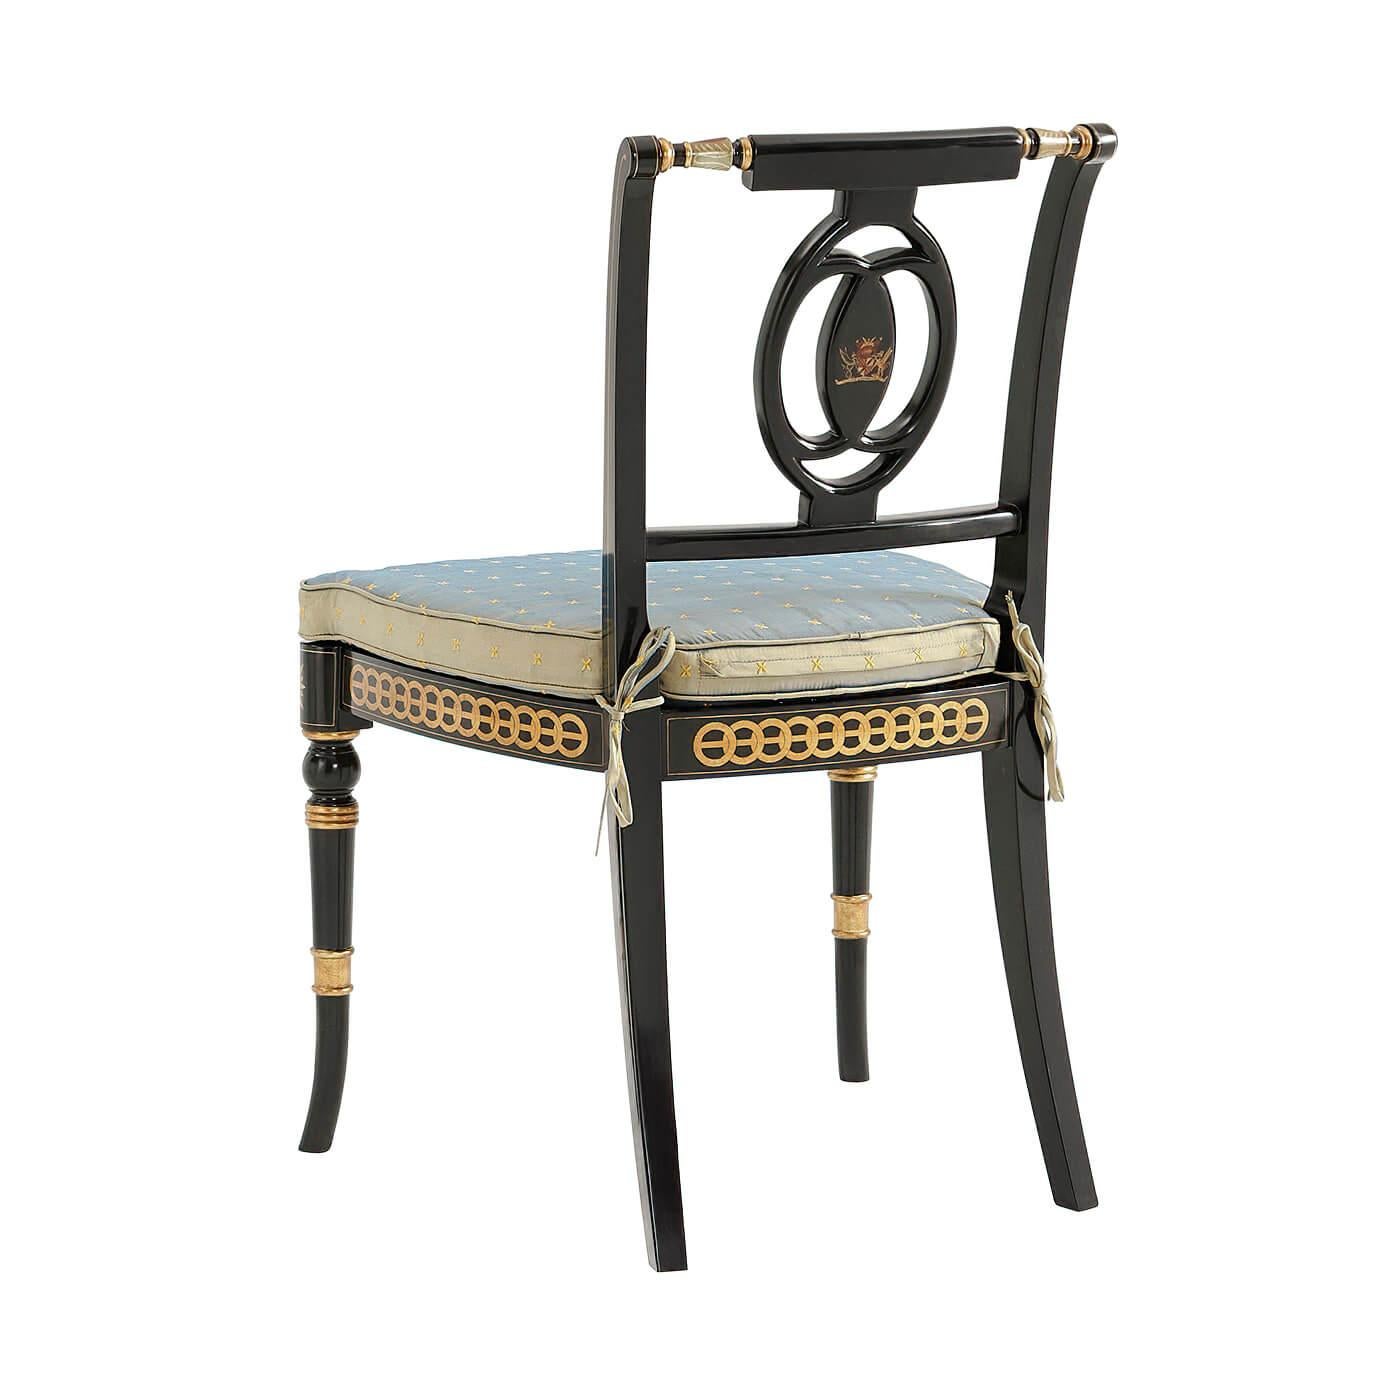 regency style chairs